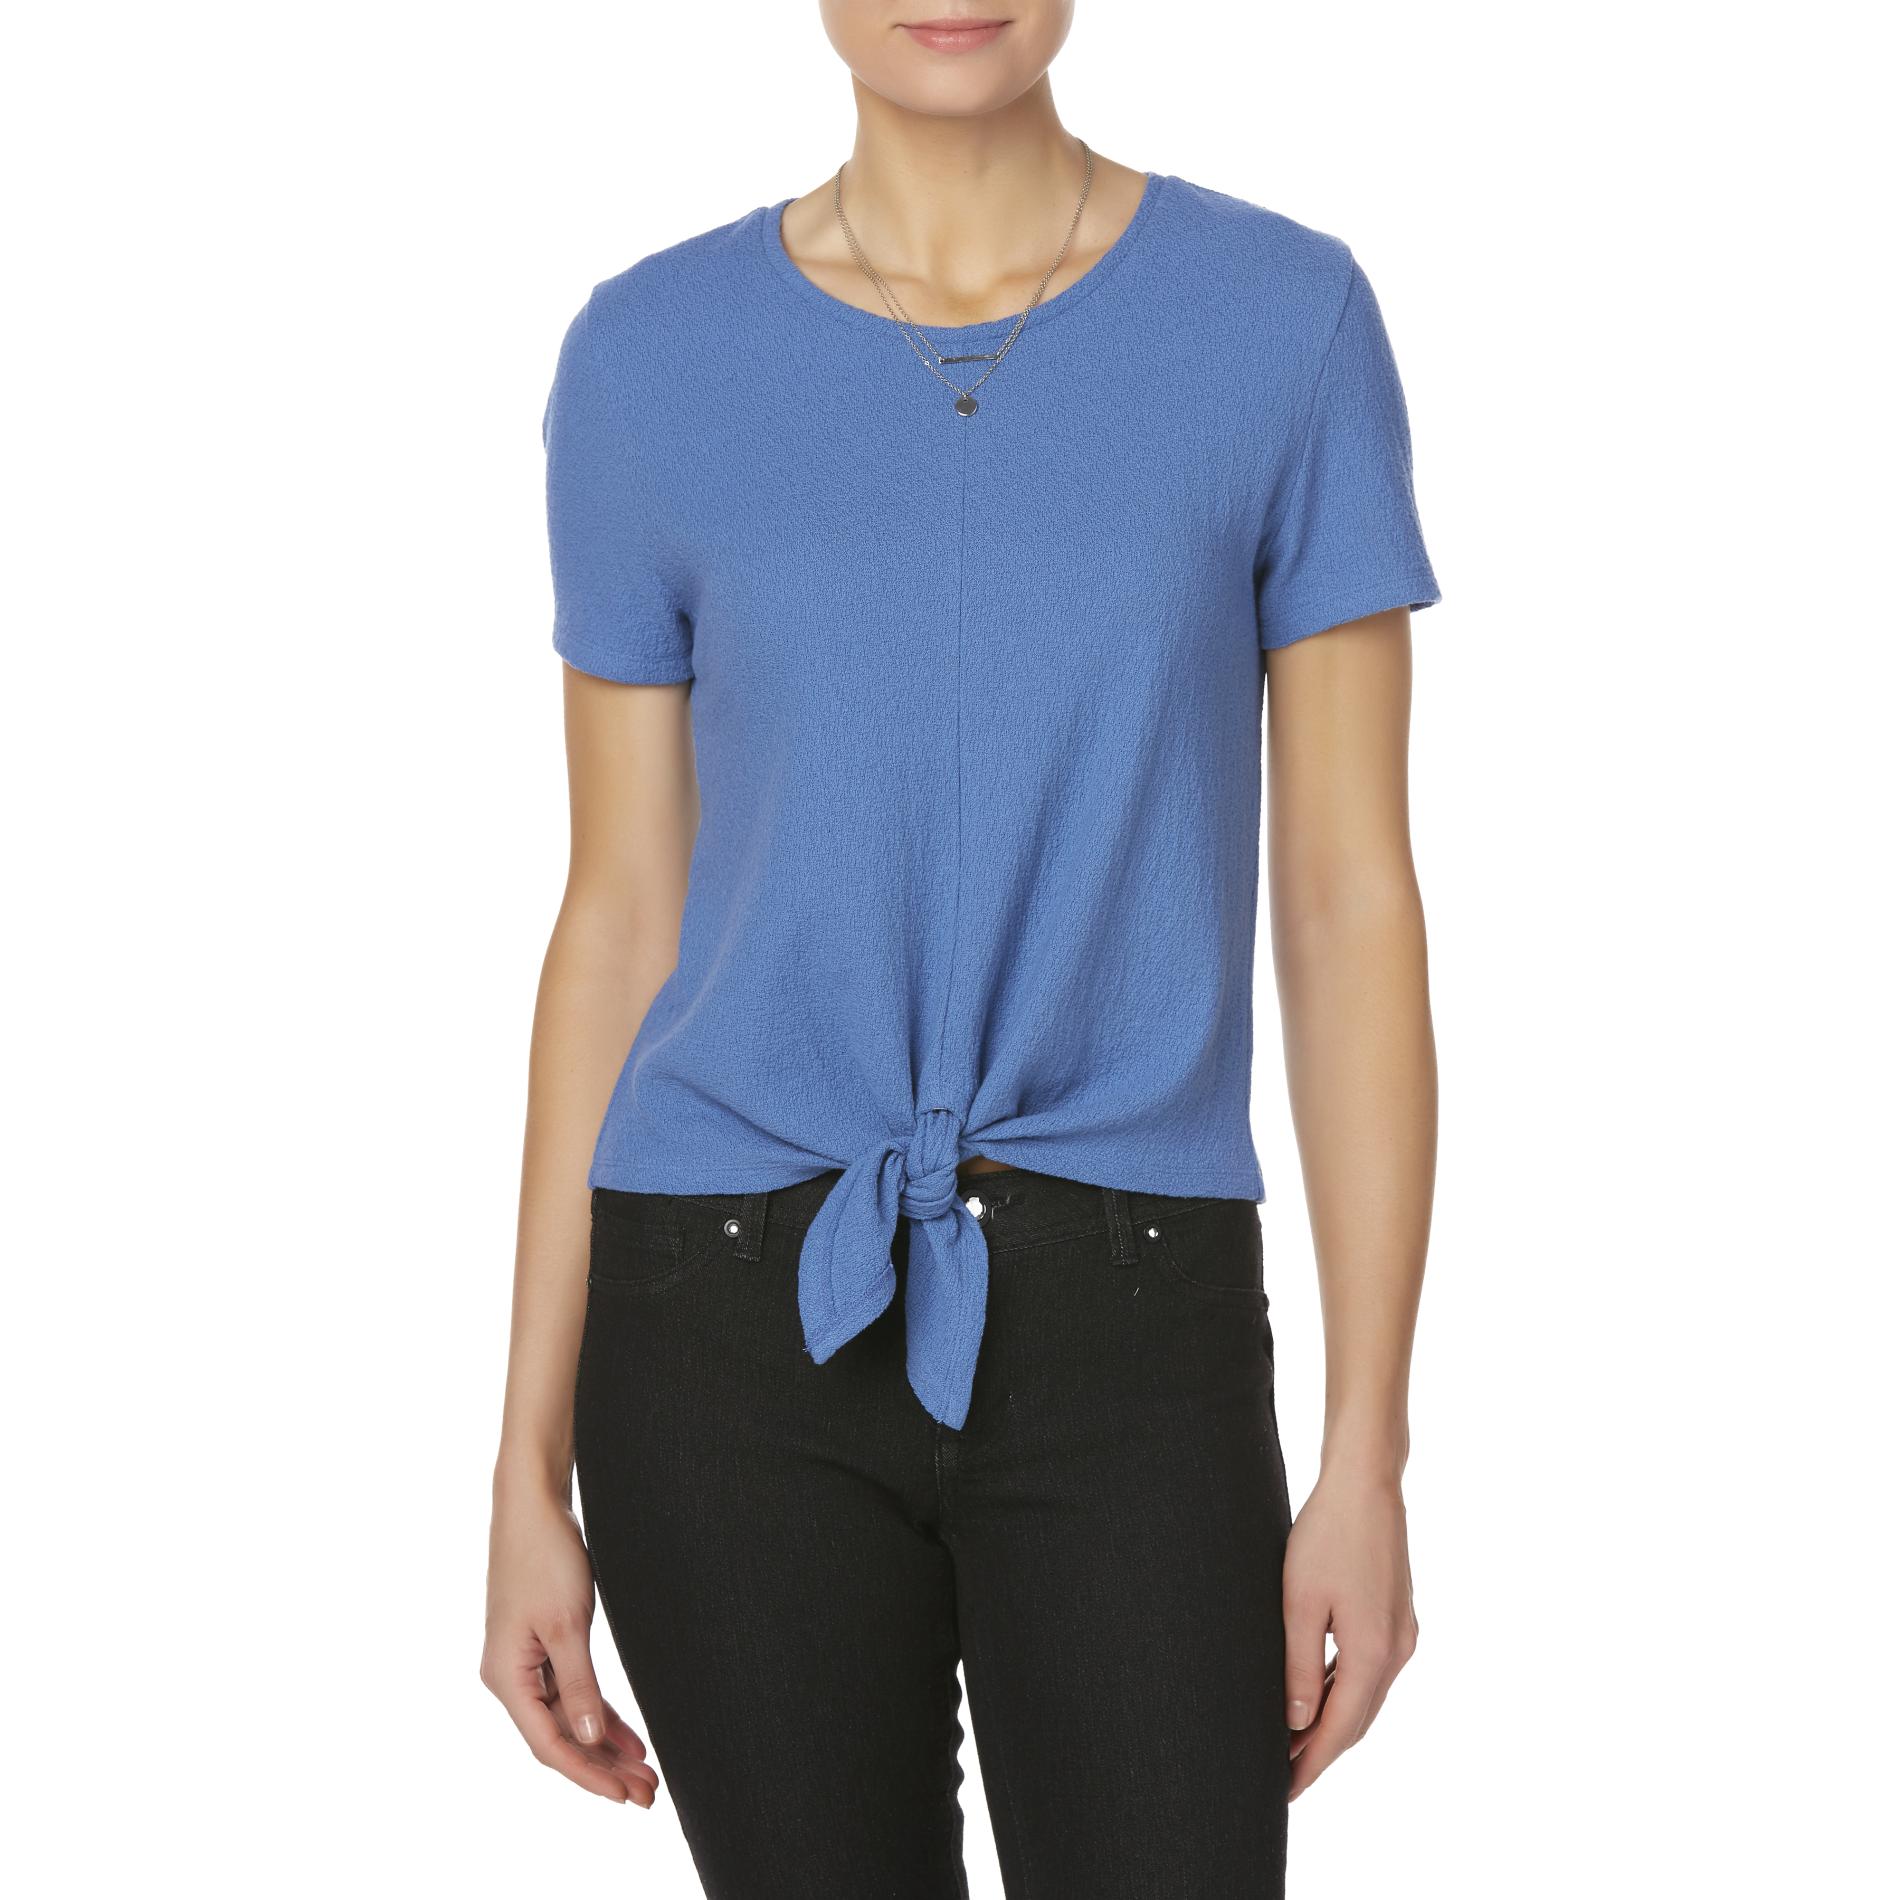 Simply Styled Women's Tie Front T-Shirt